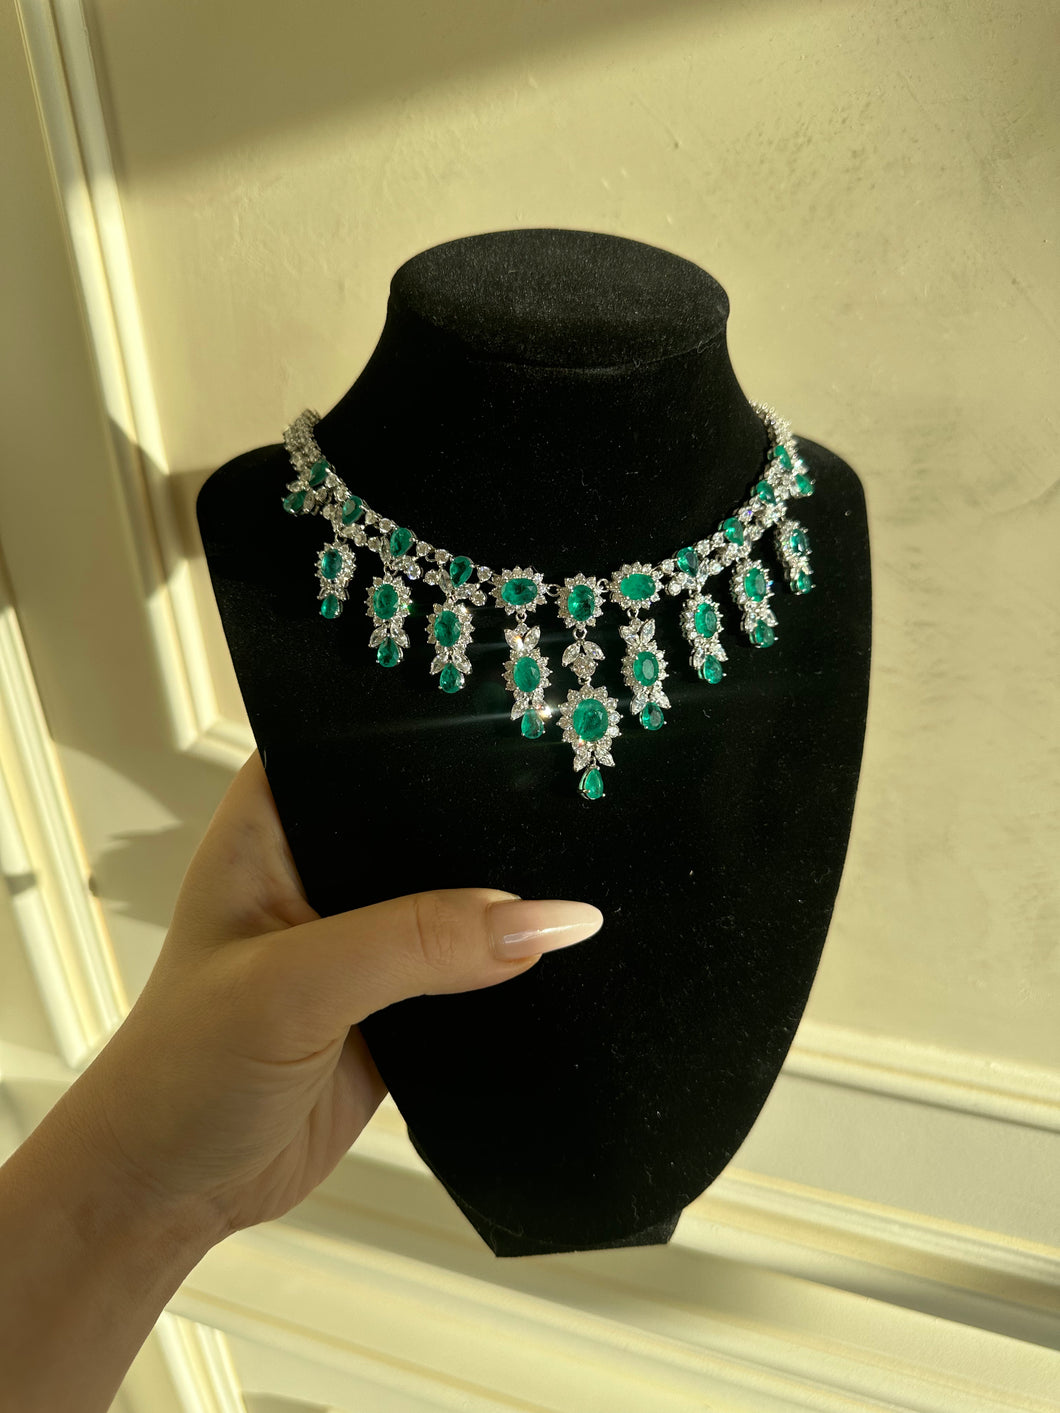 The Grand Emerald Necklace